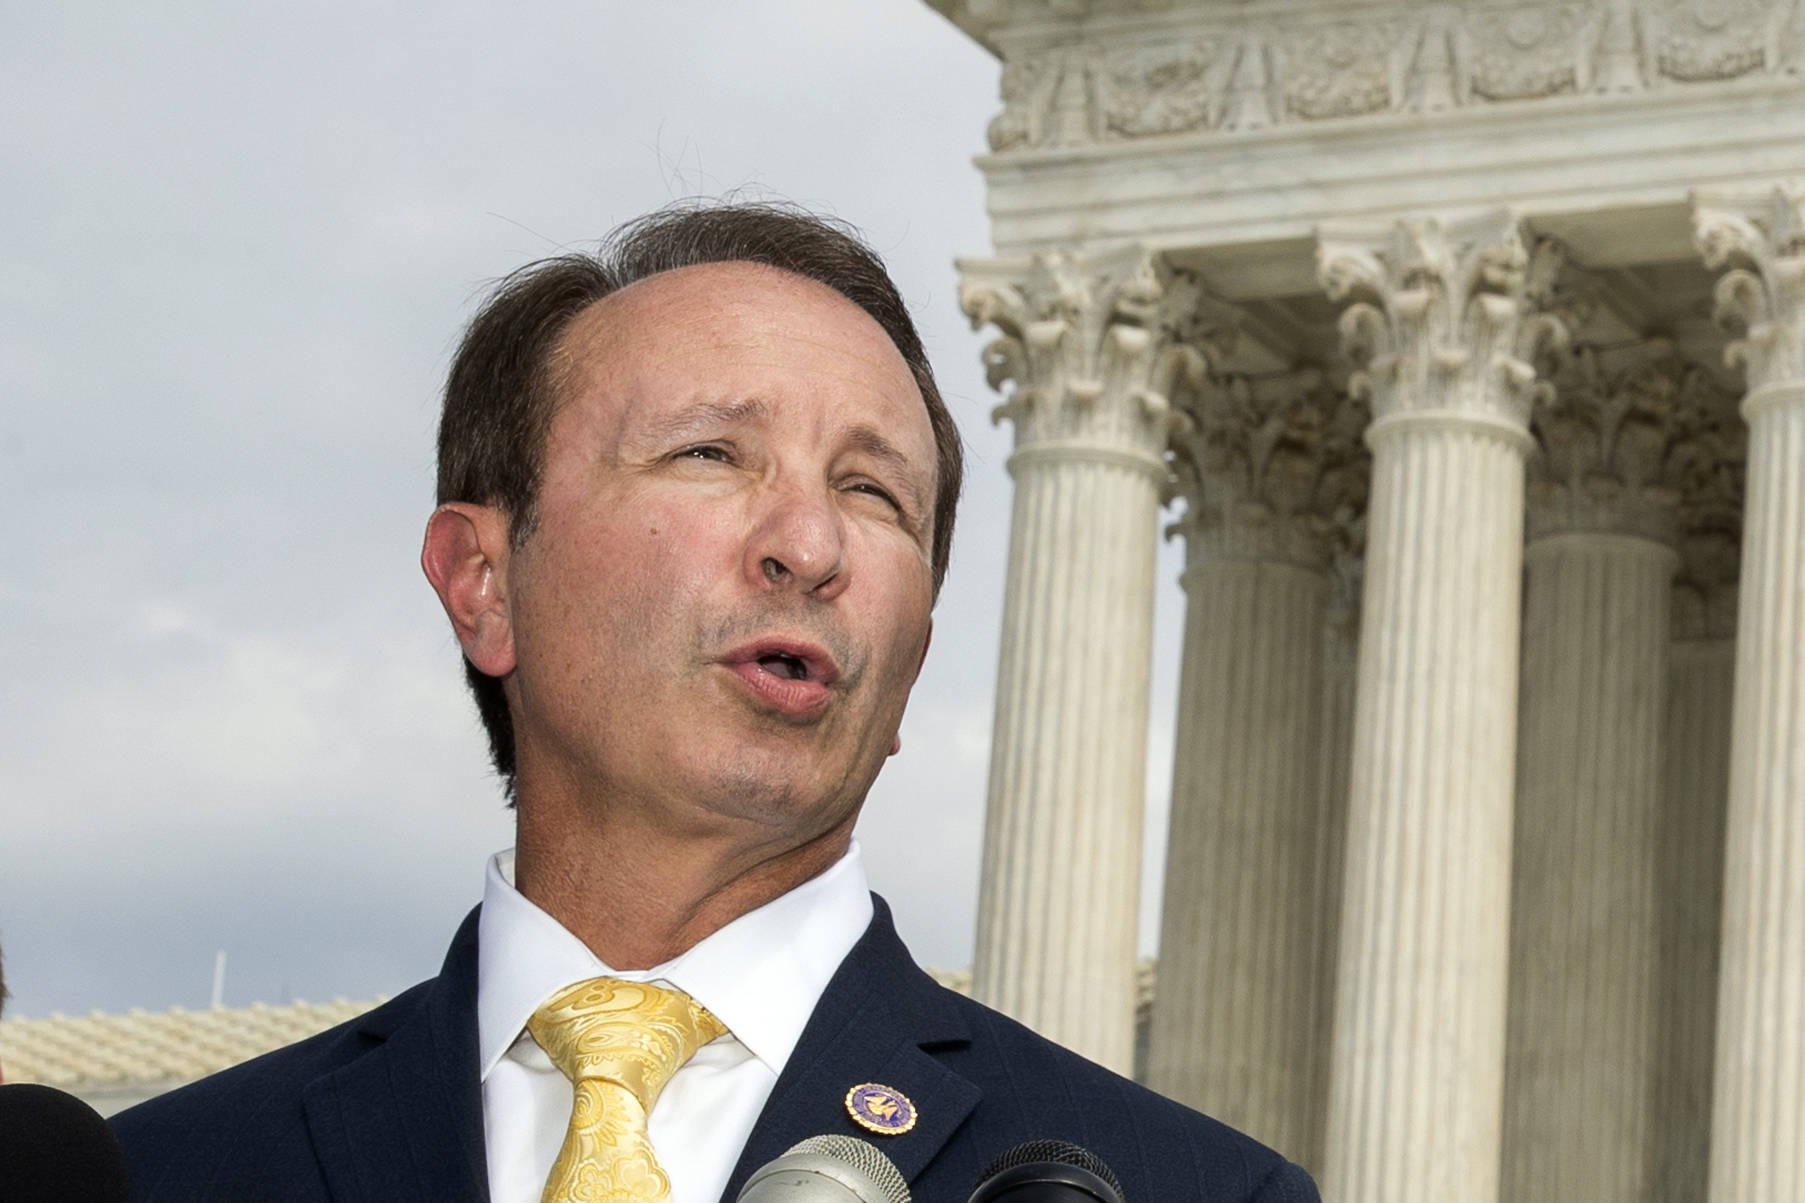 Louisiana Attorney General Jeff Landry speaks in front of the U.S. Supreme Court in Washington. The Biden administration’s suspension of new oil and gas leases on federal land and water was blocked Tuesday, June 15, 2021, by a federal judge in Louisiana. U.S. District Judge Terry Doughty’s ruling came in a lawsuit filed in March by Louisiana’s Republican attorney general, Jeff Landry and officials in 12 other states. Doughty’s ruling granting a preliminary injunction to those states said his order applies nationwide. (AP Photo / Manuel Balce Ceneta, File)